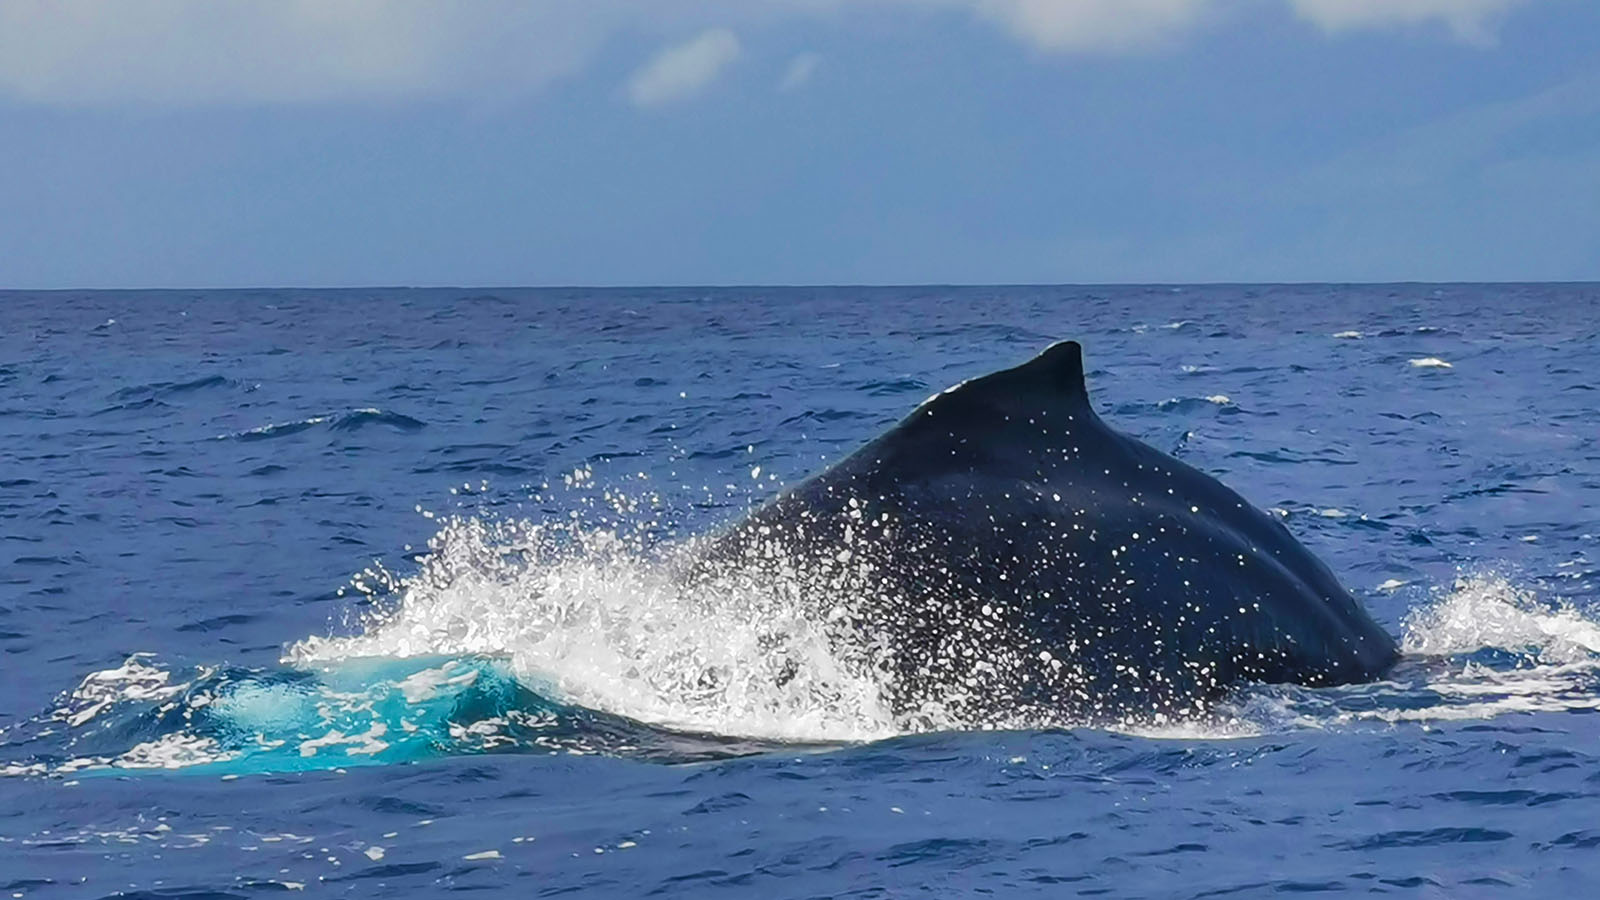 Seeing a whale in Hawaii